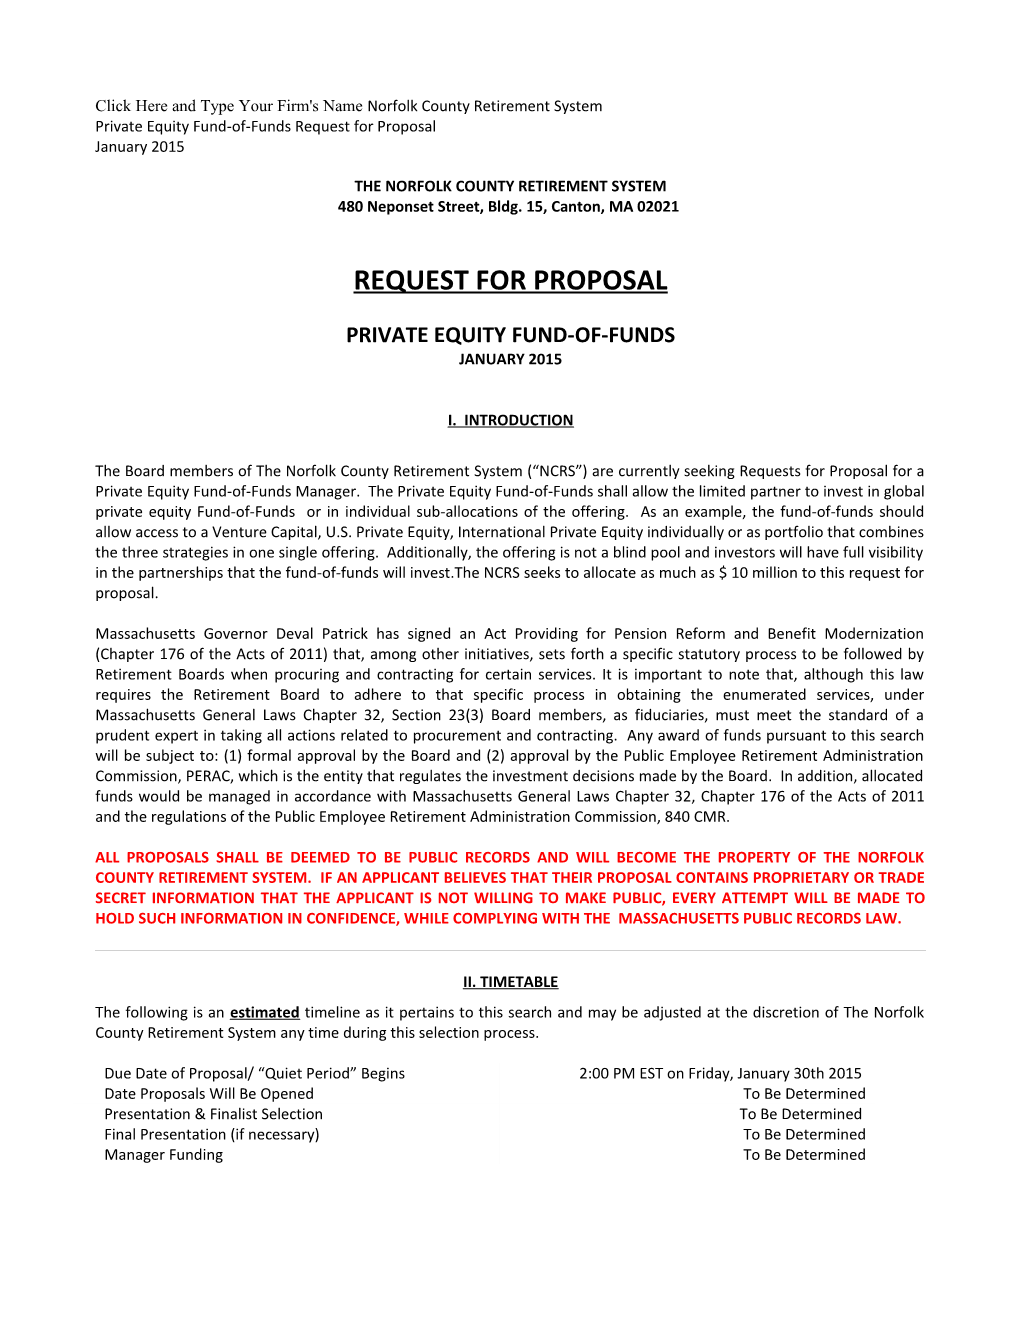 Norfolk County Retirement System - Opportunistic Hedge Fund-Of-Funds Request for Proposal